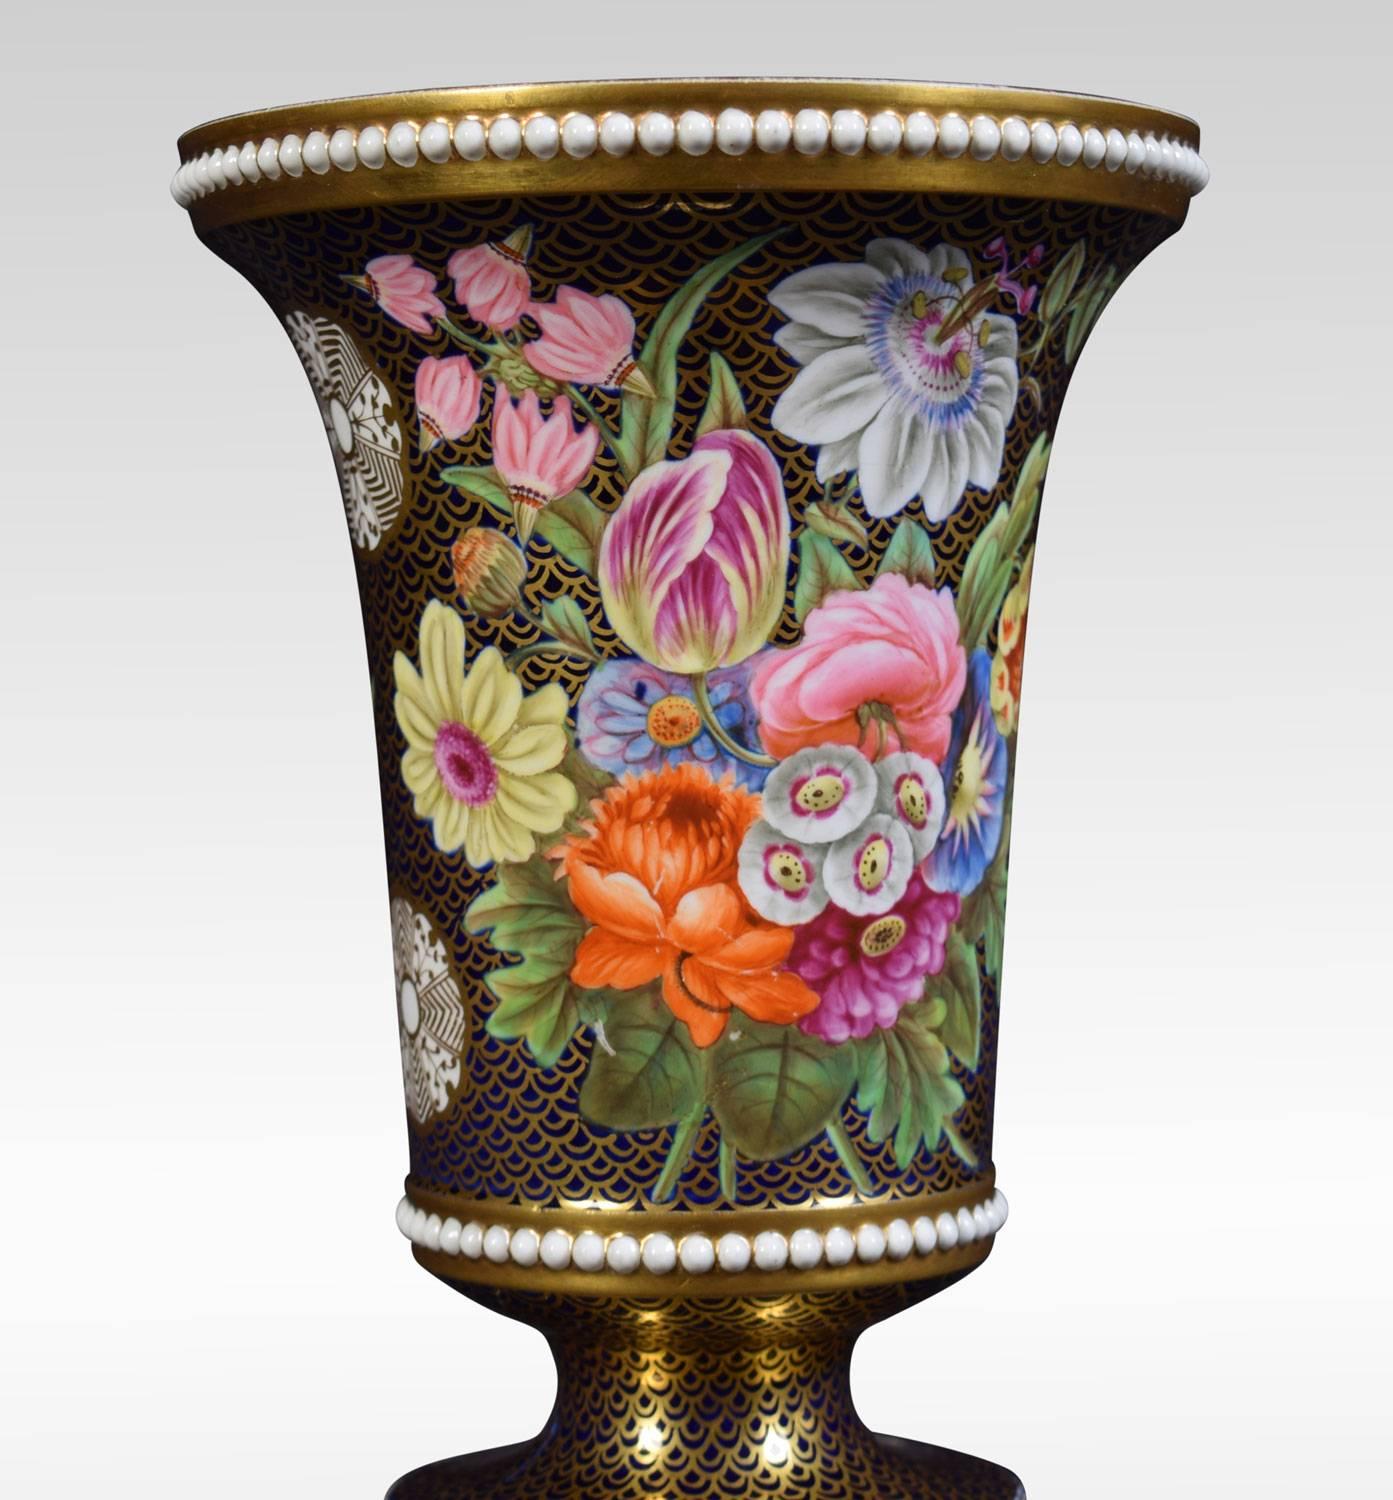 A fine Regency period Spode porcelain spill vases. Of trumpet form with white beaded pearl bands and decorated with painted flowers and fruit on a solid gold background.
Dimensions
Height 6.5 inches
Width 5 inches
Depth 5 inches.